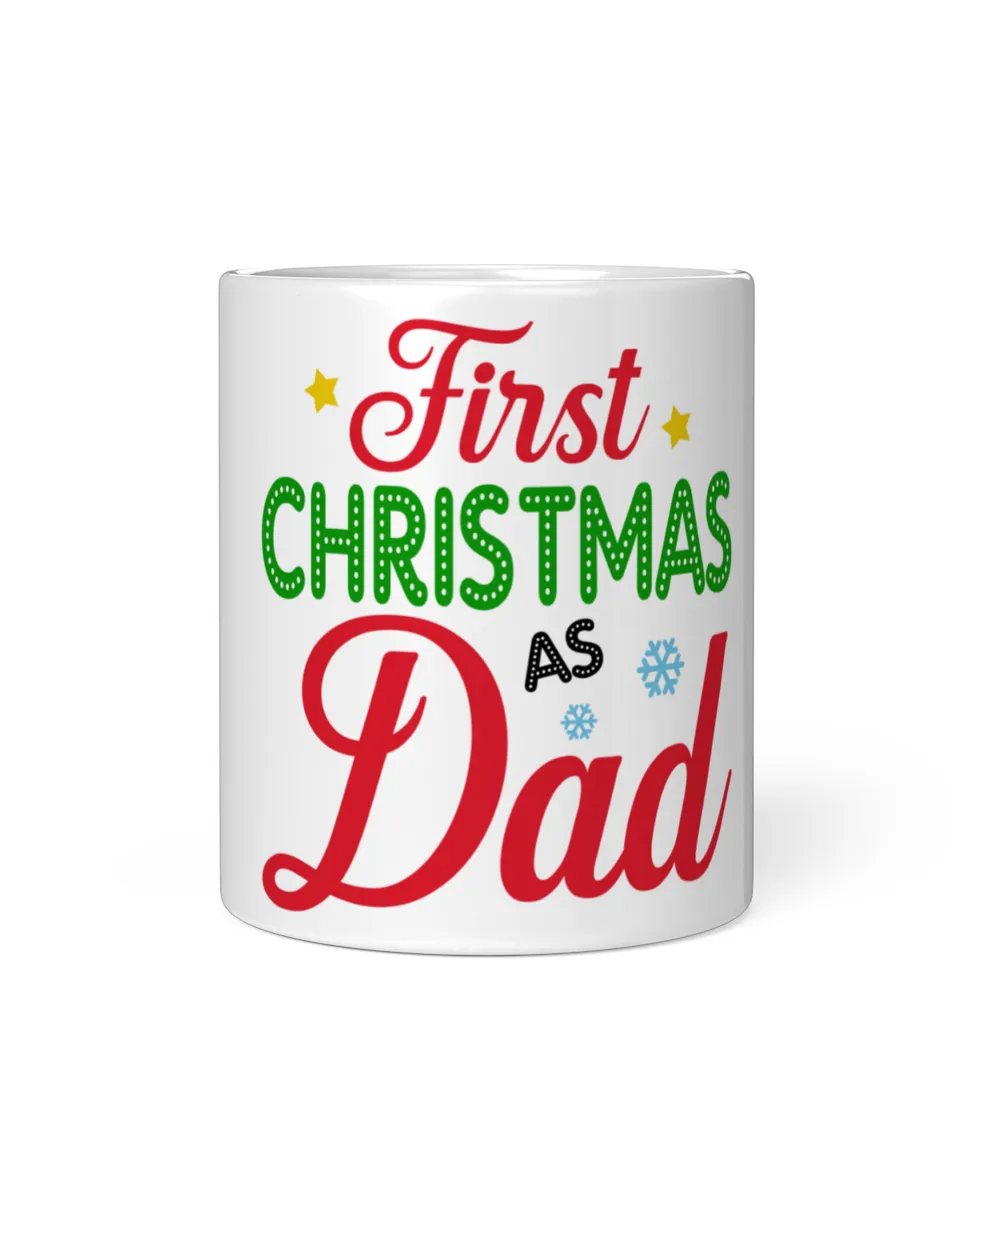 Our 1st Family Christmas, First Christmas As Dad Wine Tumbler (12 oz)